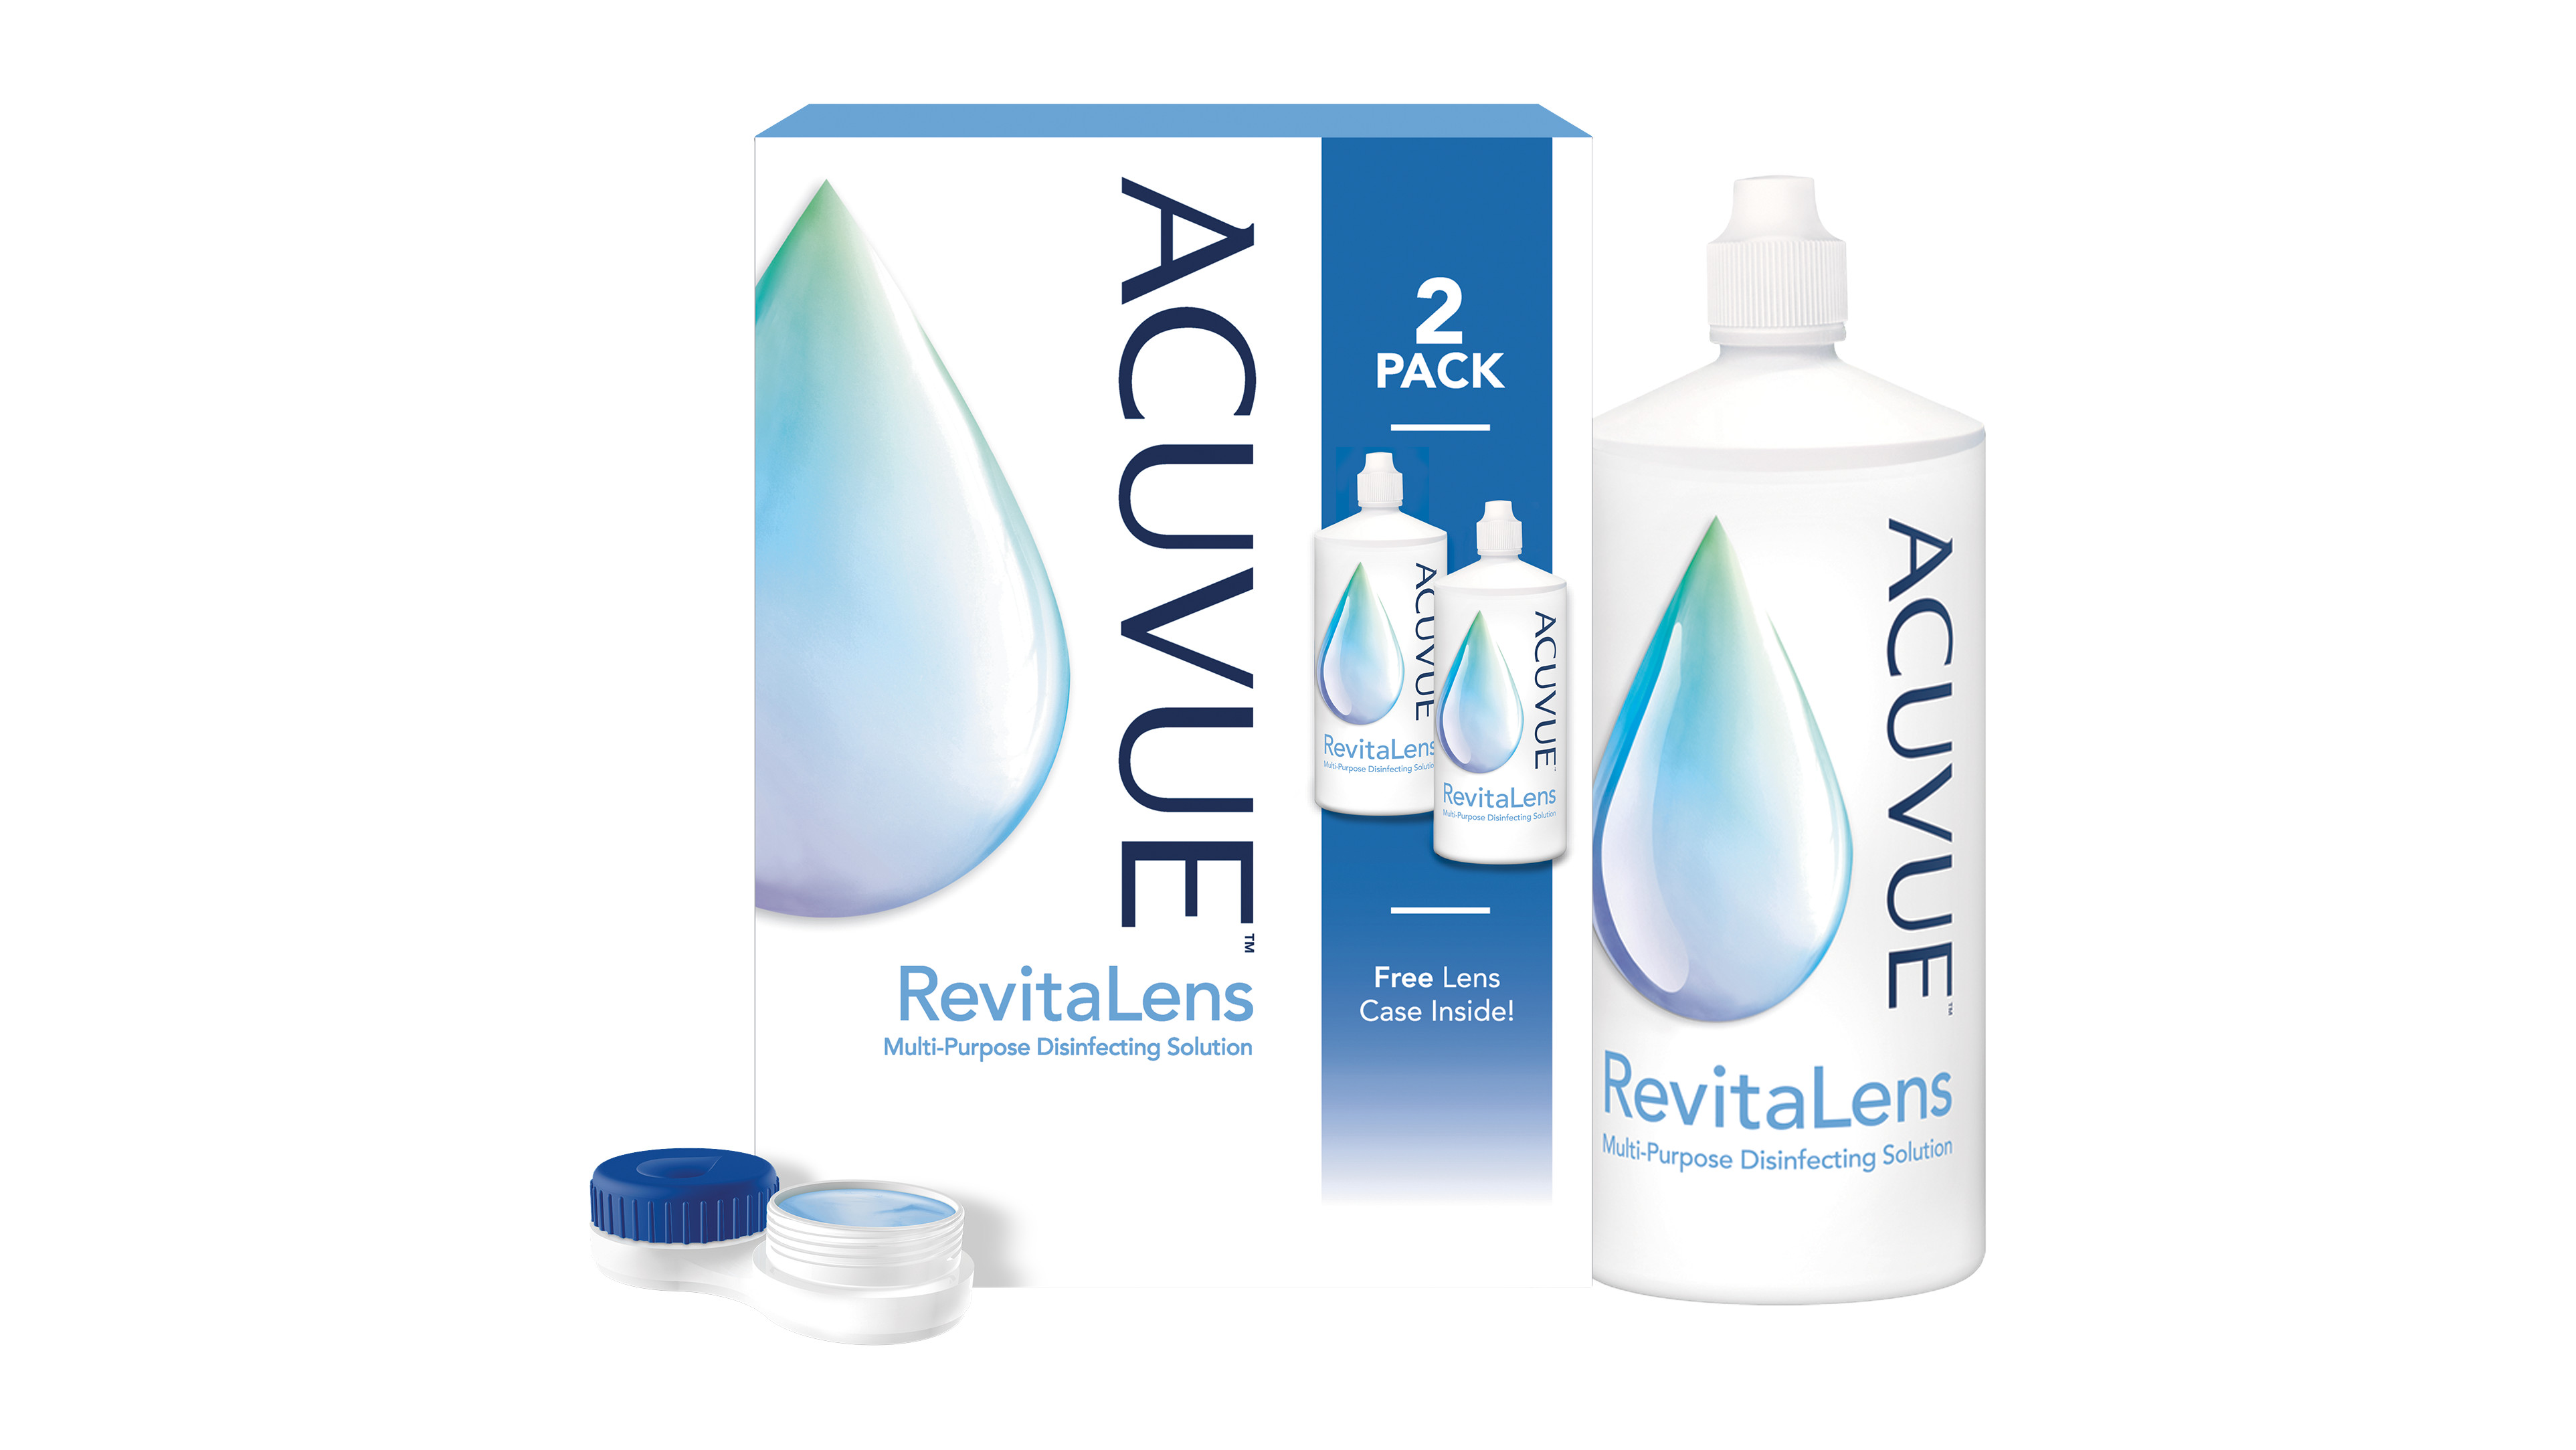 Front All in one Light ACUVUE RevitaLens MPDS SC 2x300mL All-in-One Pflege Doppelpack 600ml